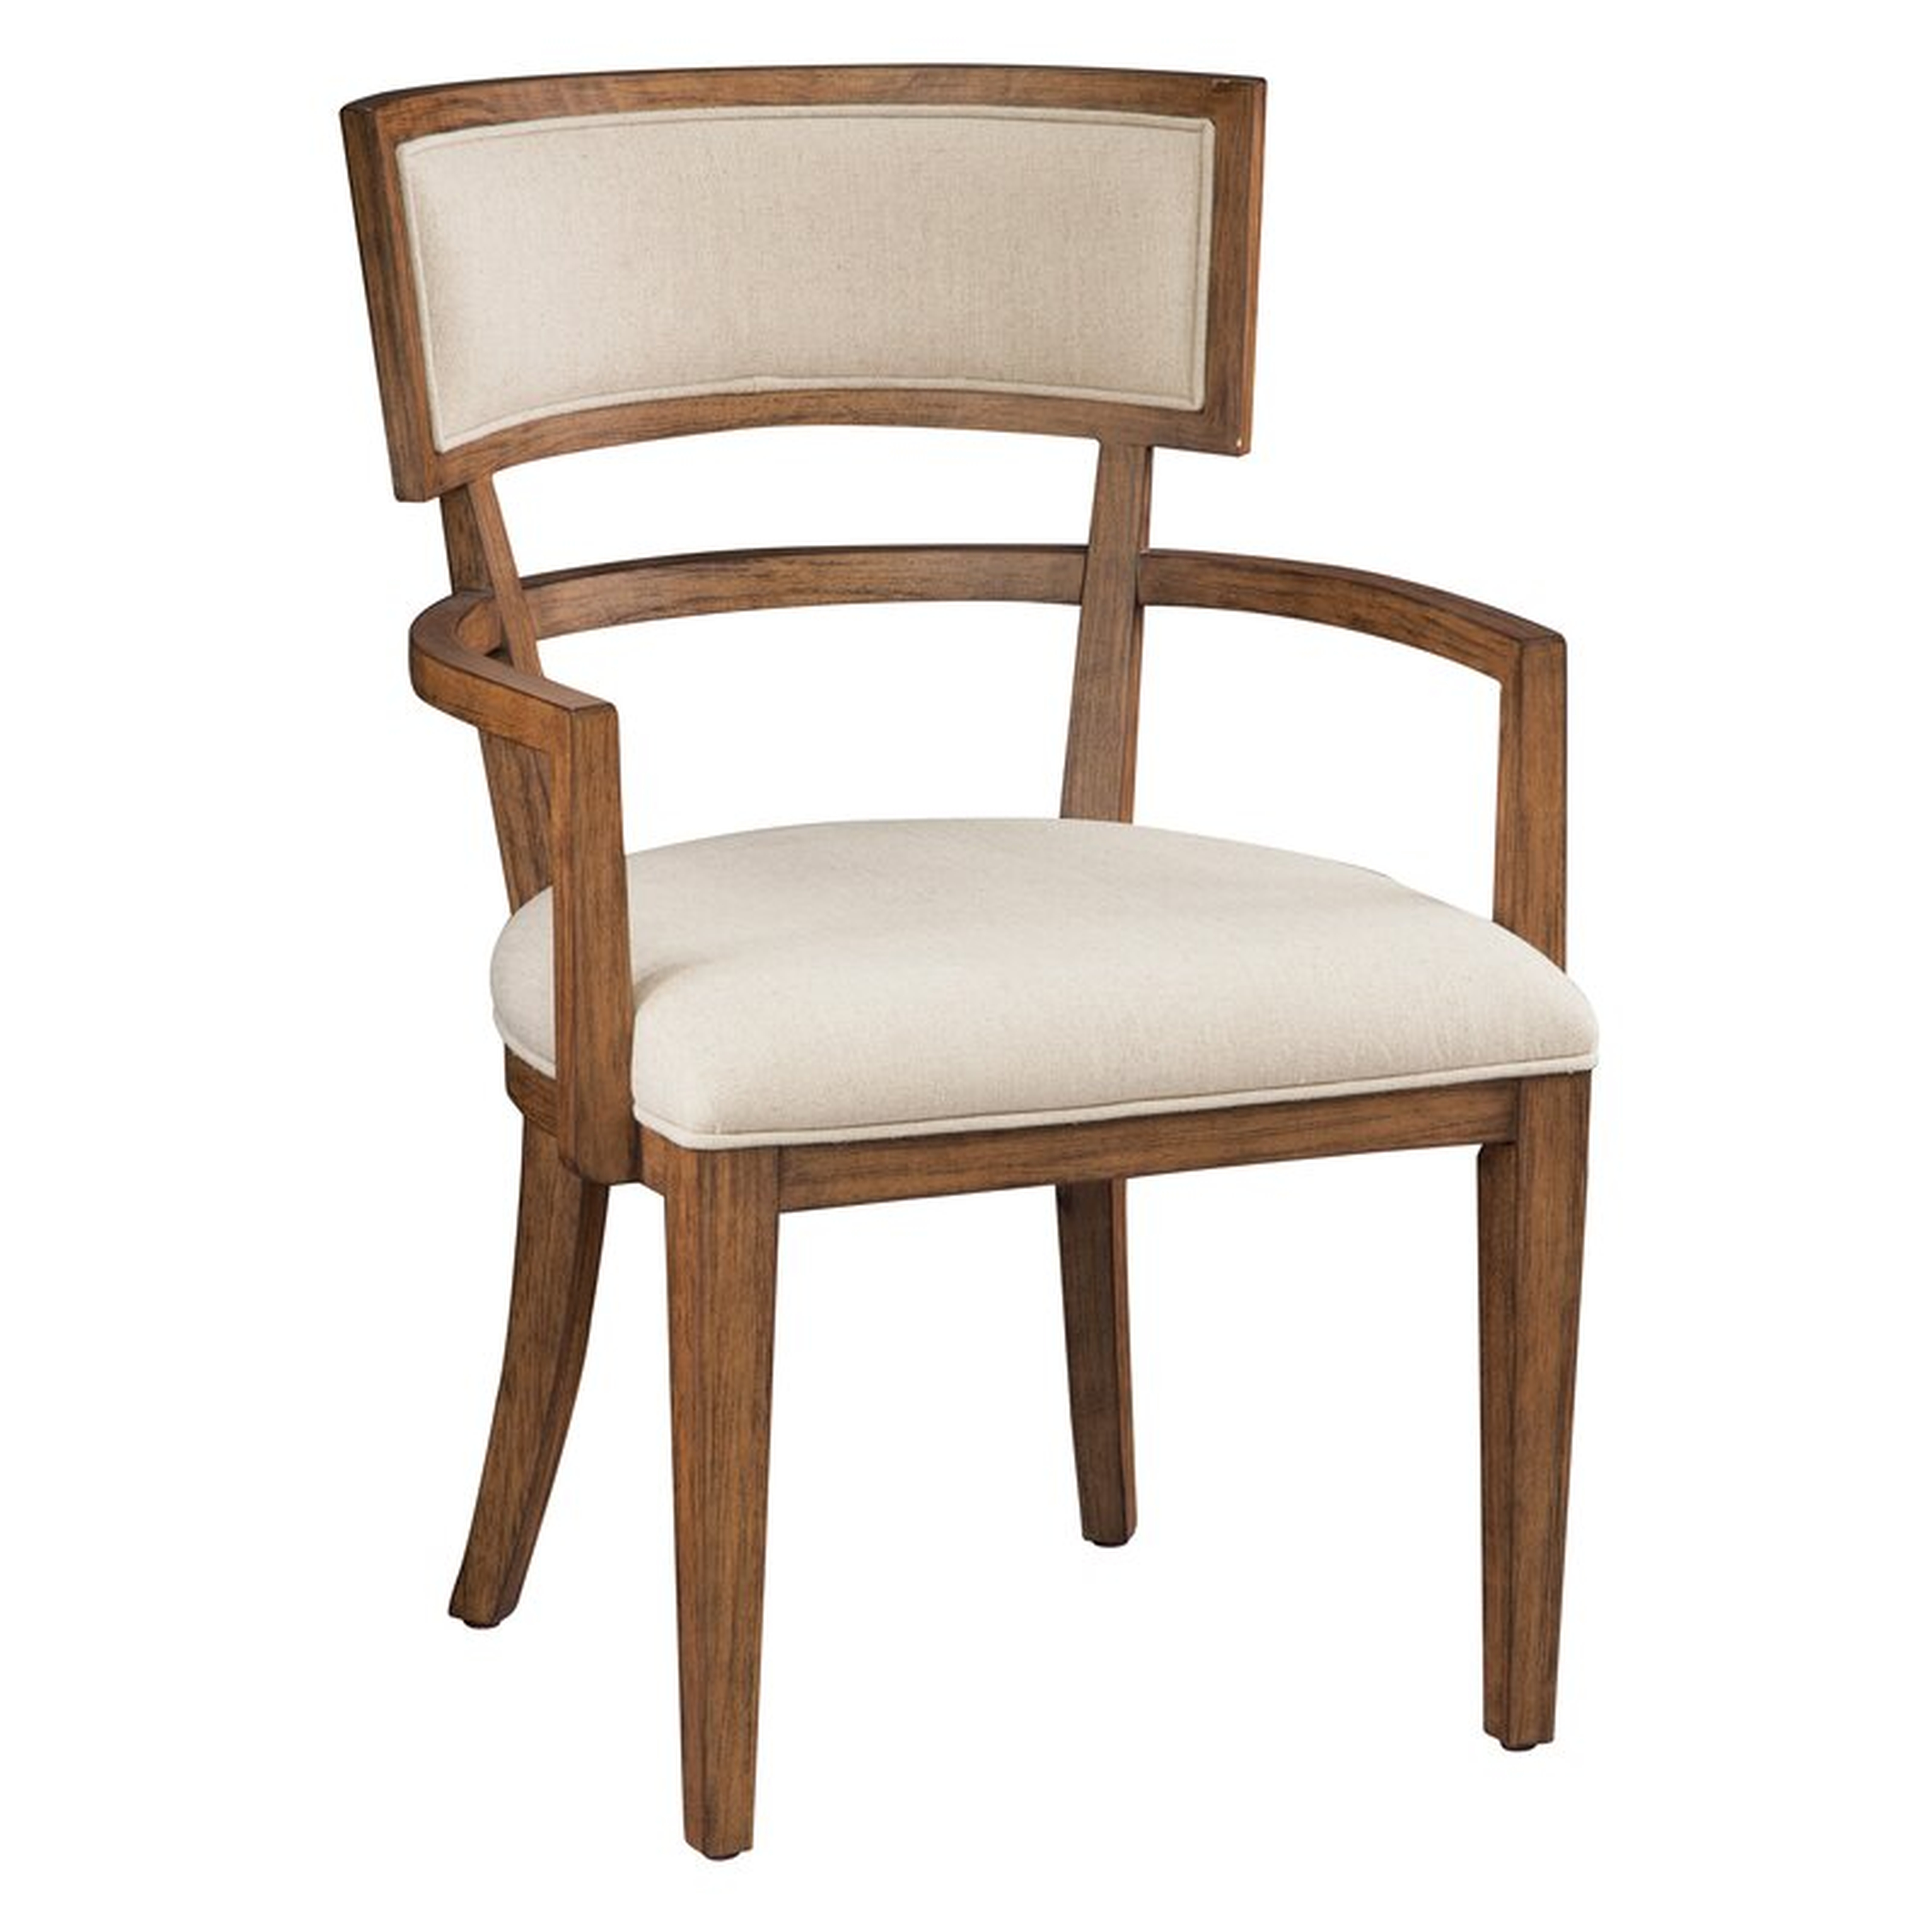 Hekman Bedford Park Upholstered Dining Chair - Perigold